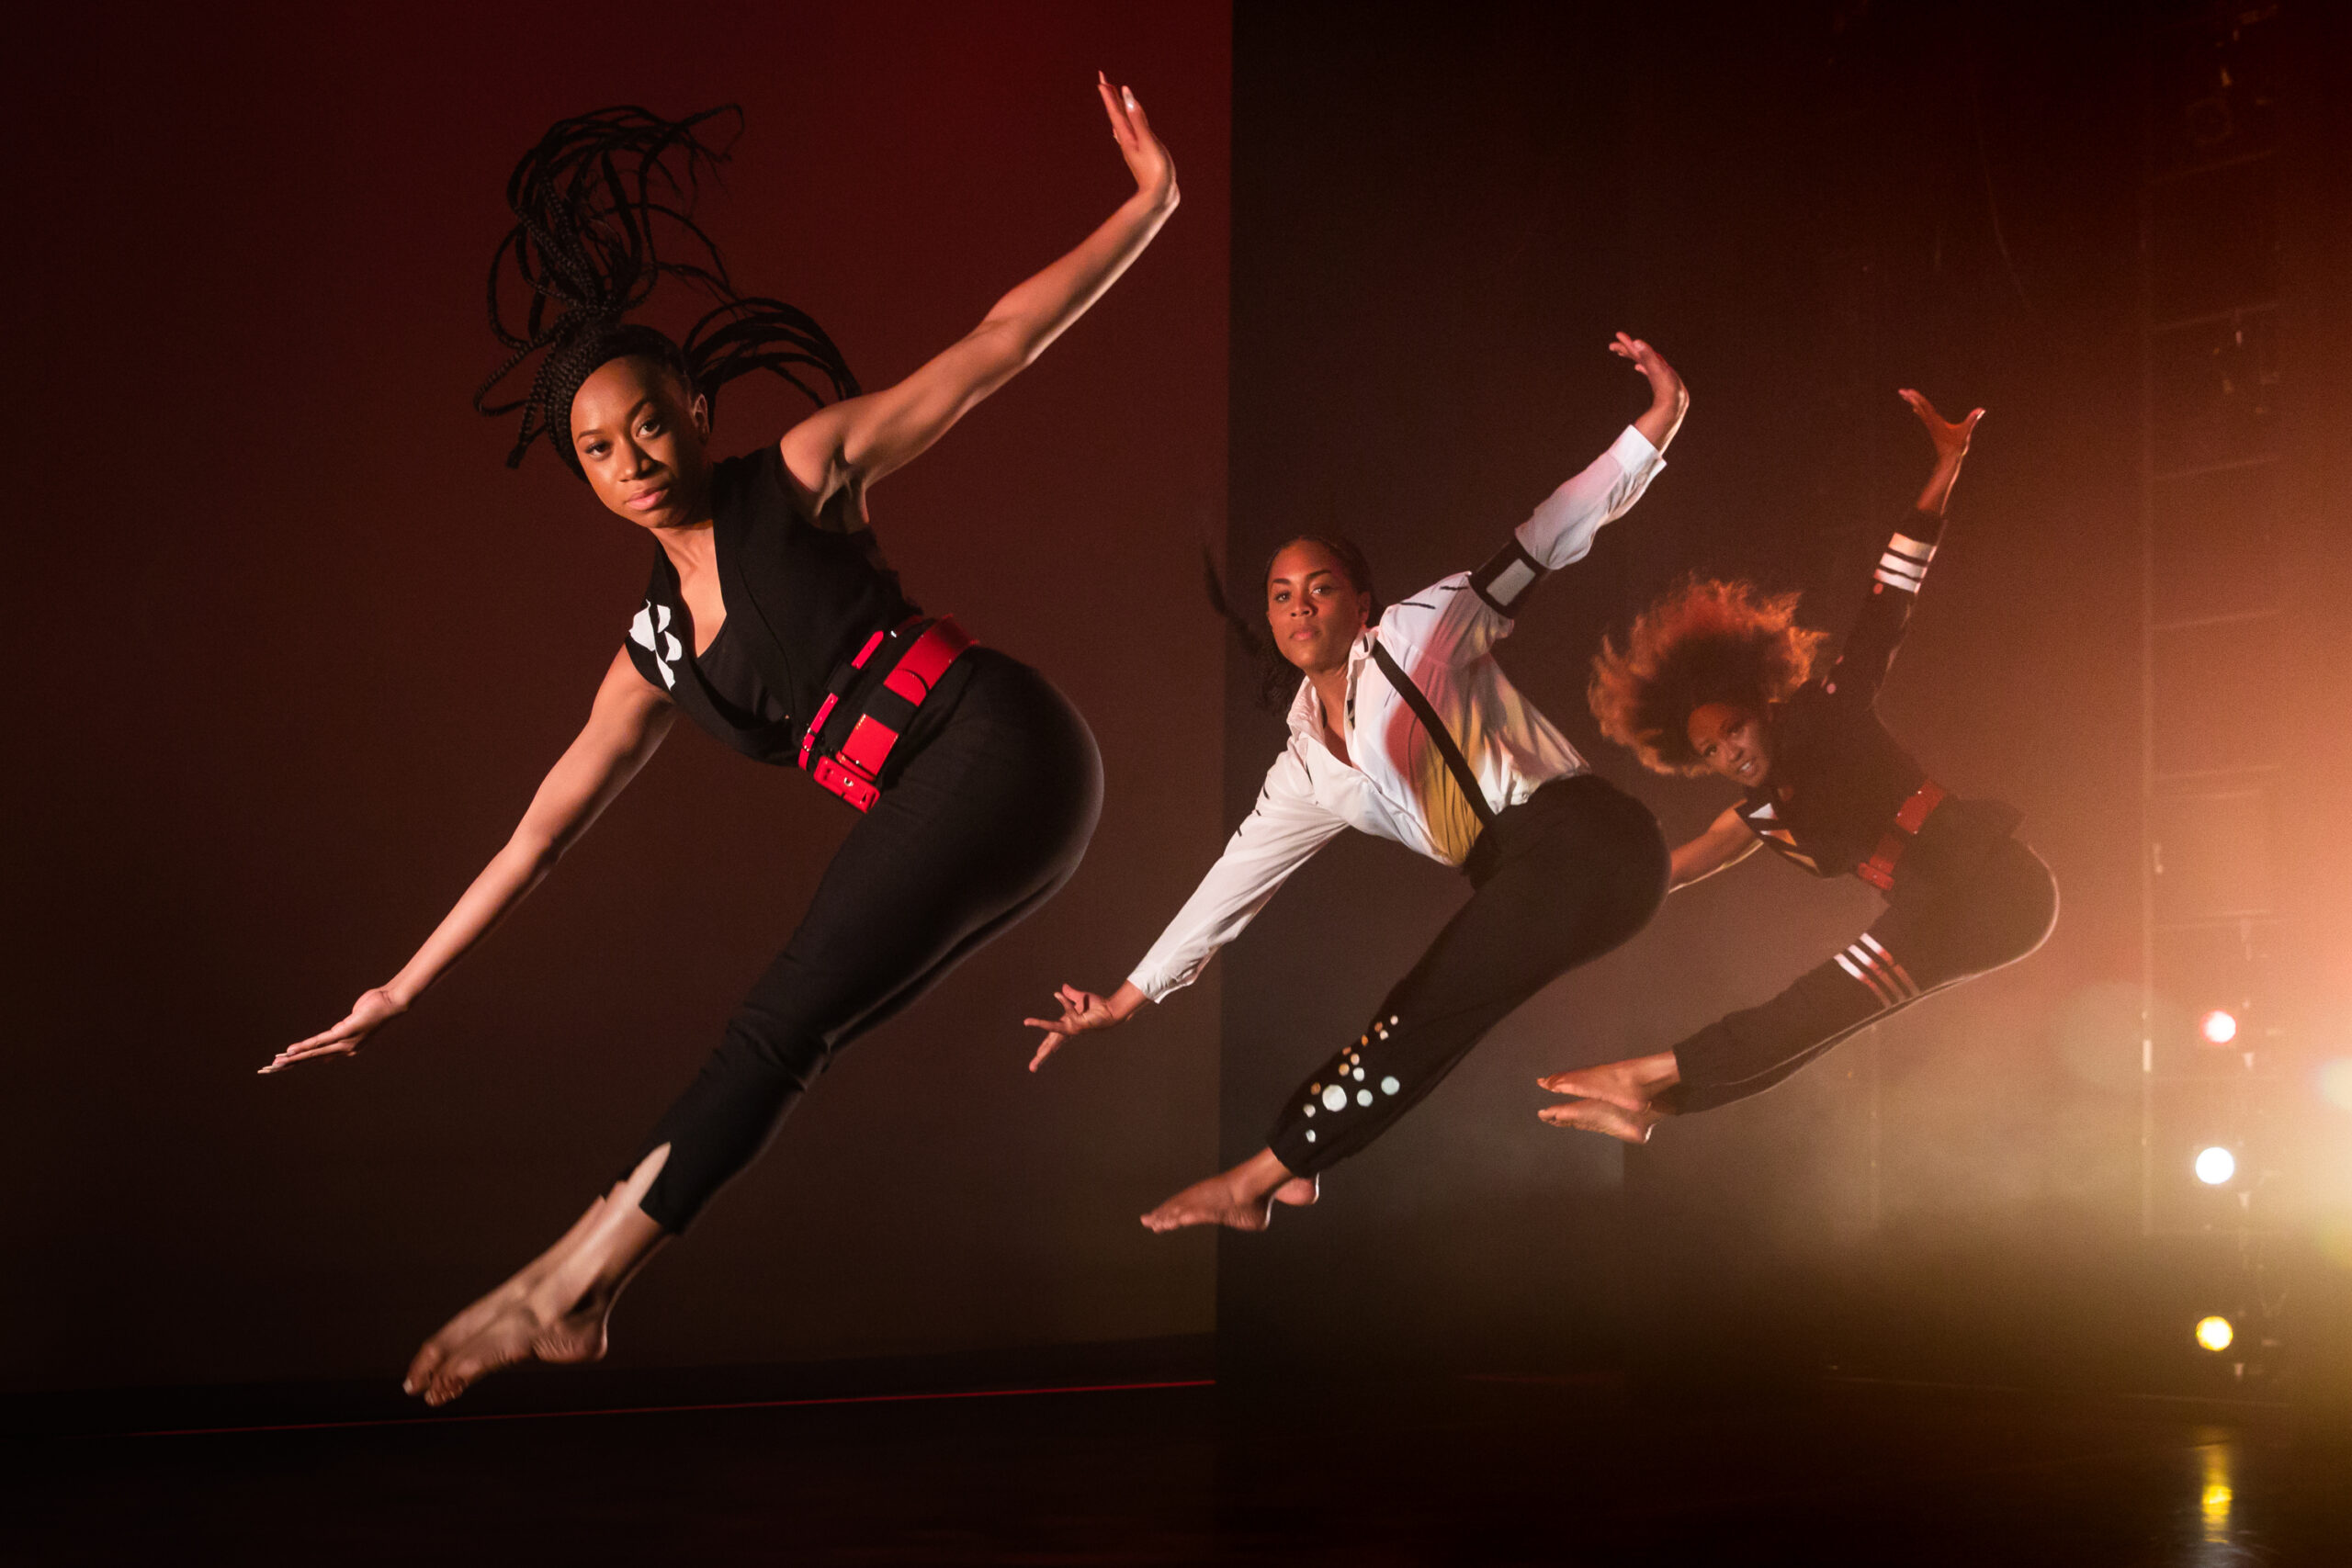 three dancers captured mid-jump with their feet pointed and their arms outstretched